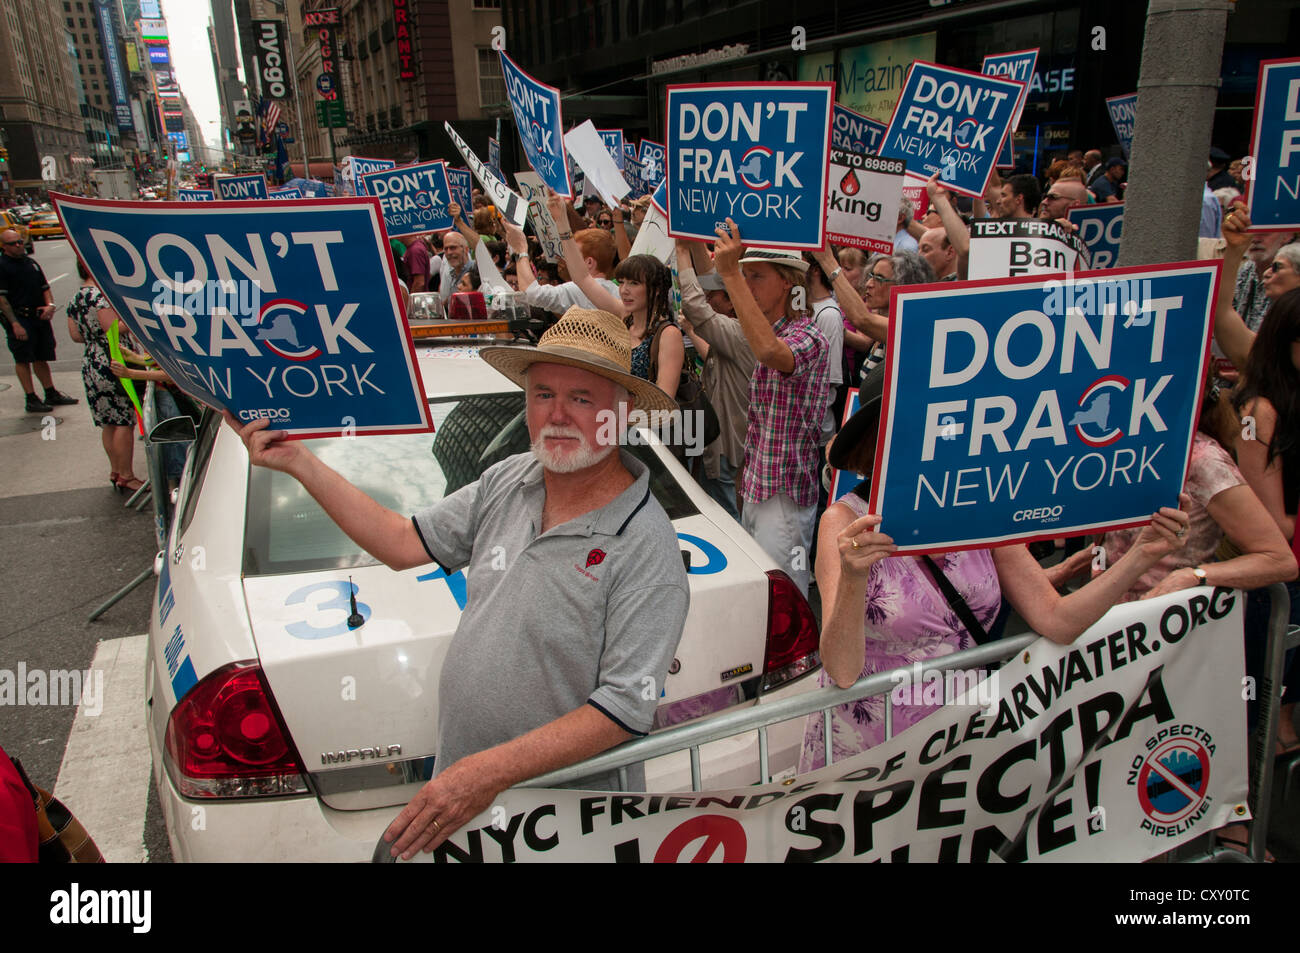 Activists demonstrate in a Manhattan protest against fracking for natural gas in New York outside NY Governor Cuomo's hotel. Stock Photo